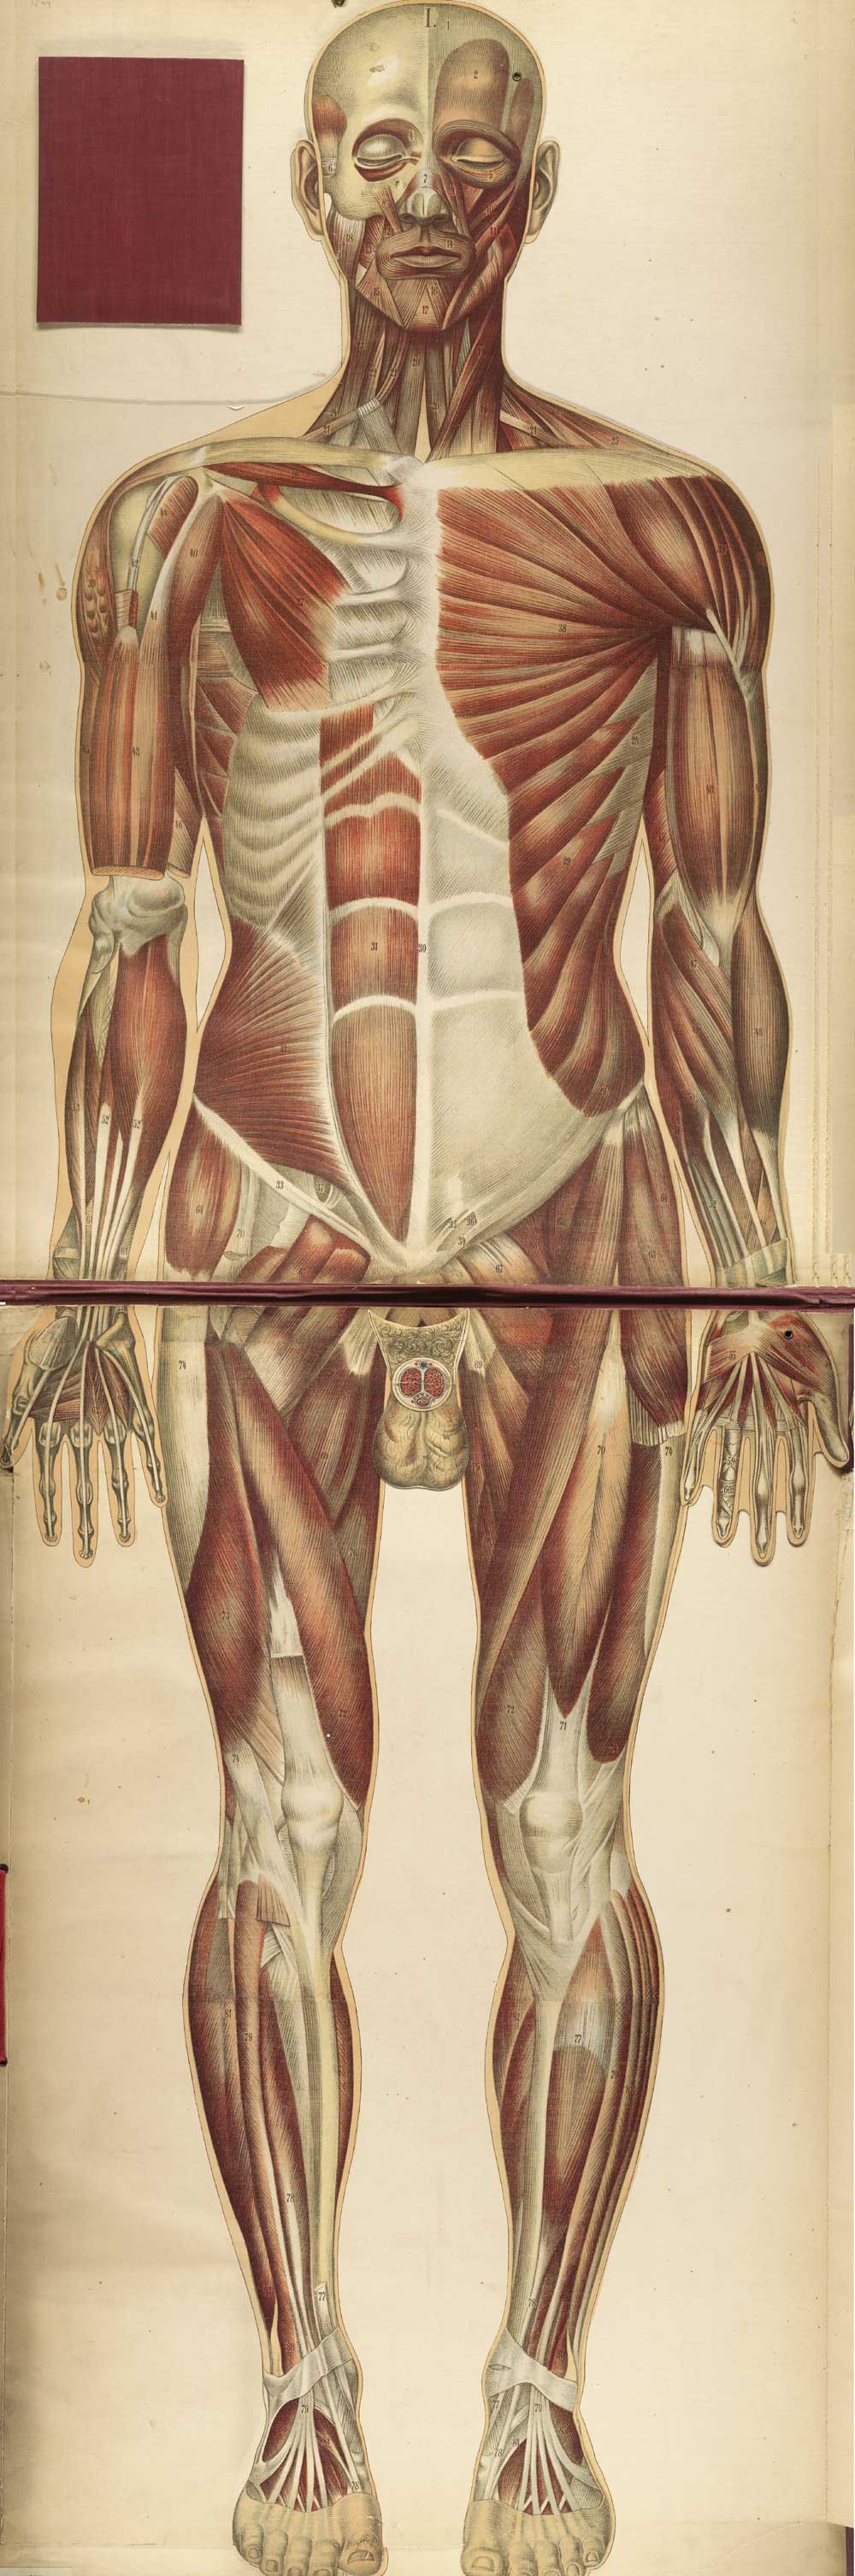 Chromolithograph showing the musculature of the front of the human body, from Julien Bouglé’s Le corps humain en grandeur naturelle, NLM Call no. WE B758c 1899.